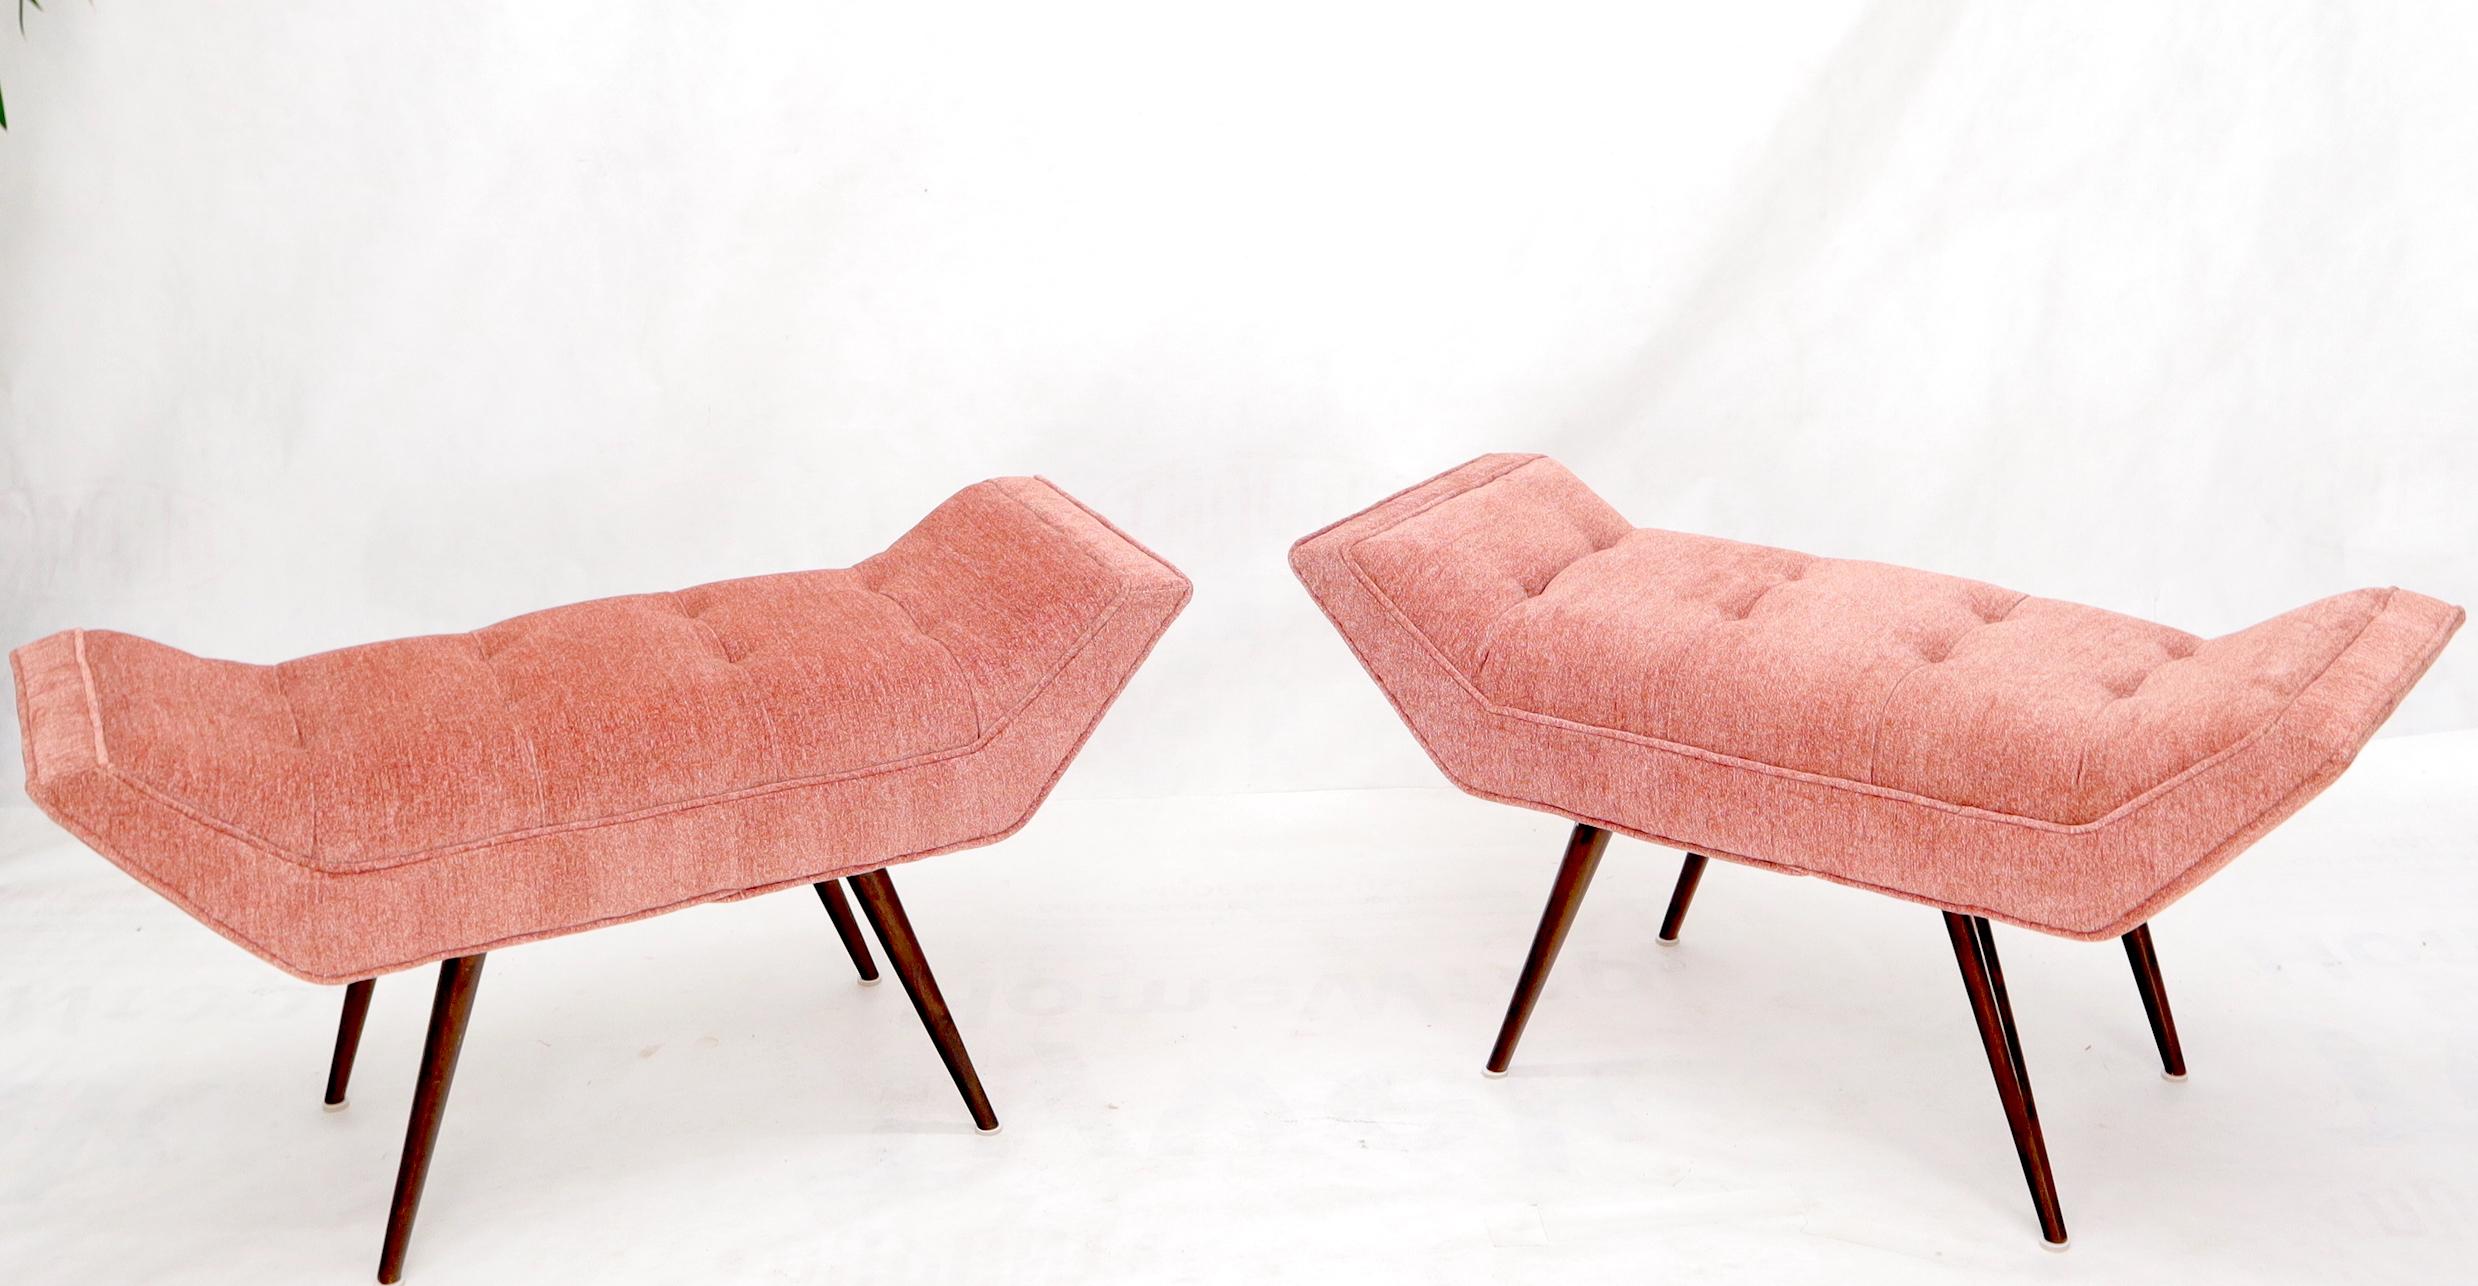 Pair of newly upholstered Italian style Mid-Century Modern dowel leg benches.